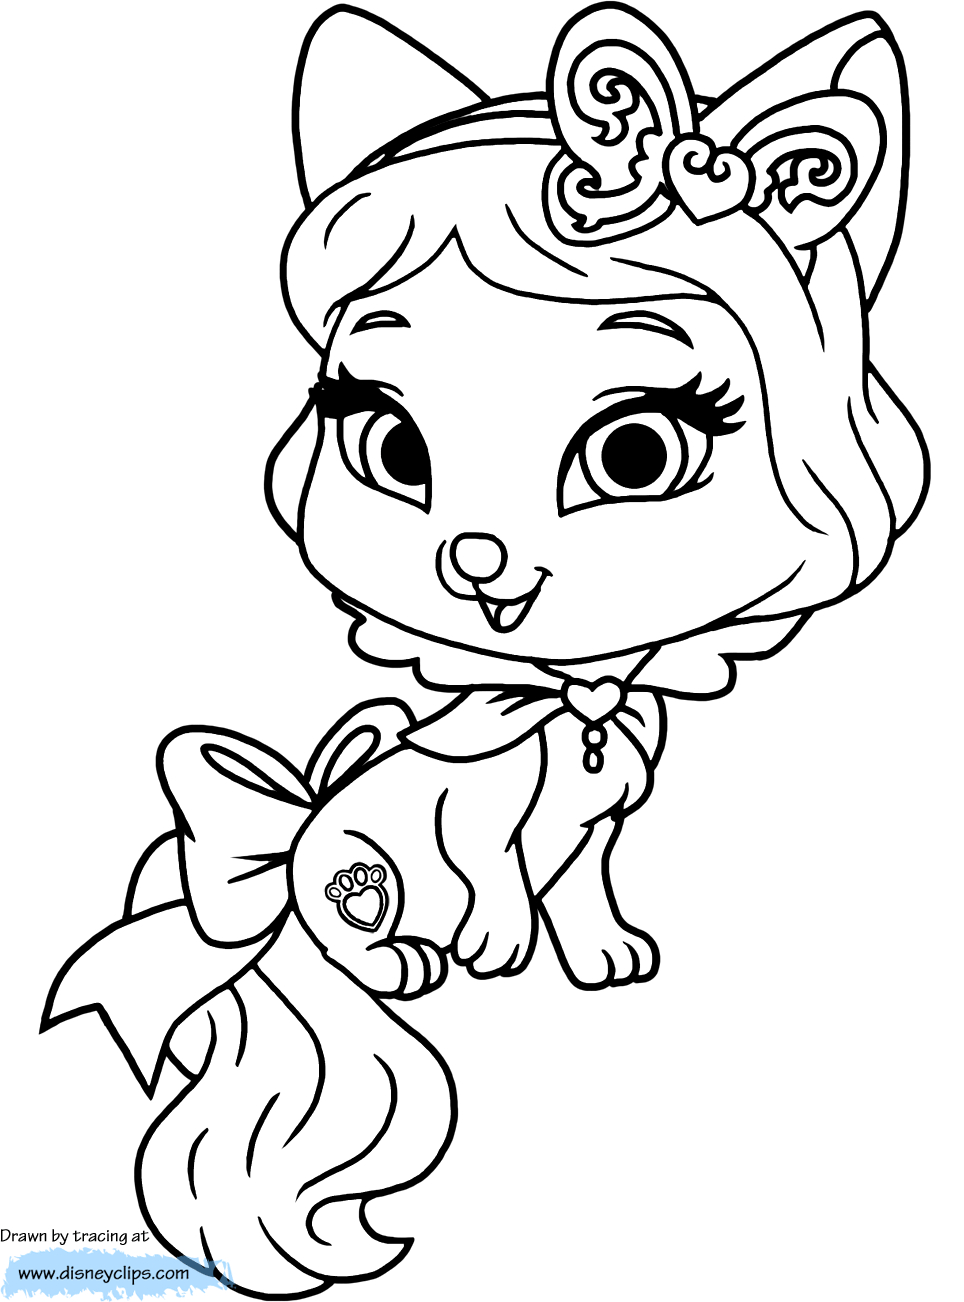 Coloring Pages Of Stuffed Animals Coloring Pages Coloring Disney Palace Pets Printable Pages